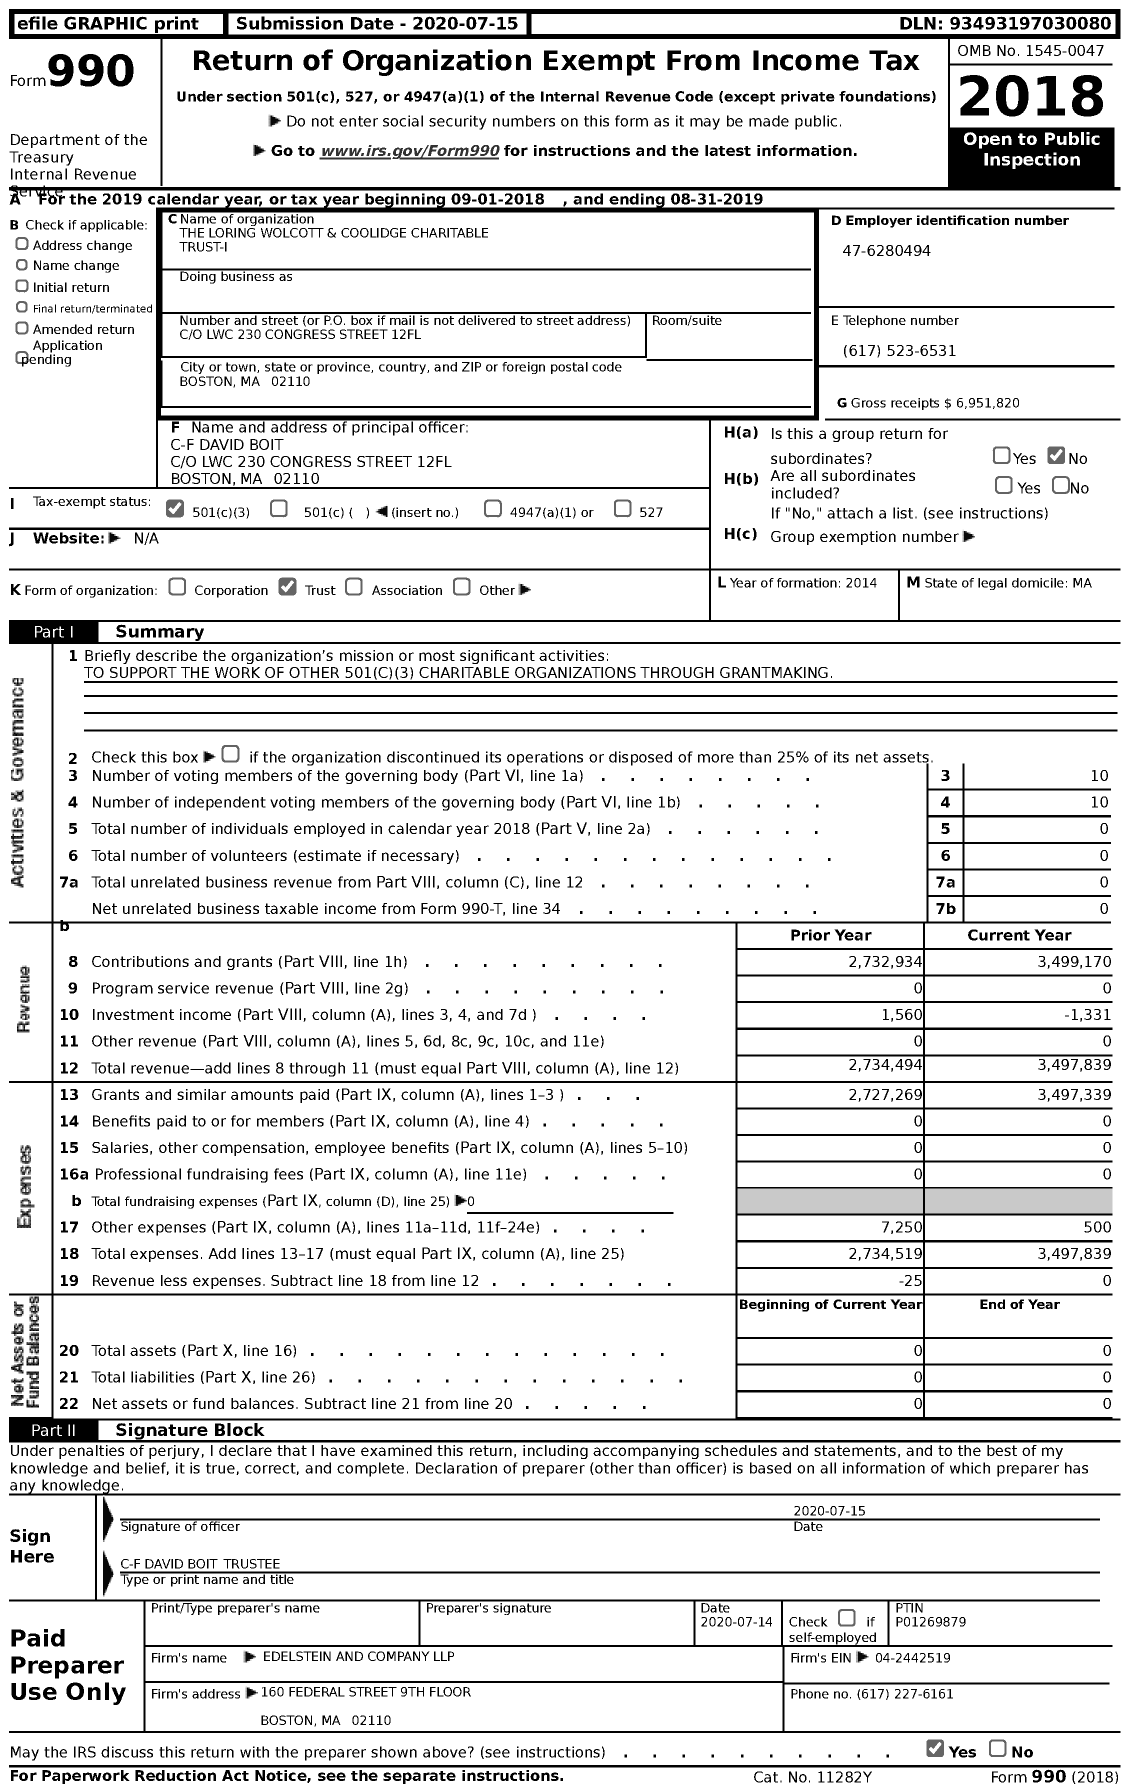 Image of first page of 2018 Form 990 for Loring, Wolcott & Coolidge